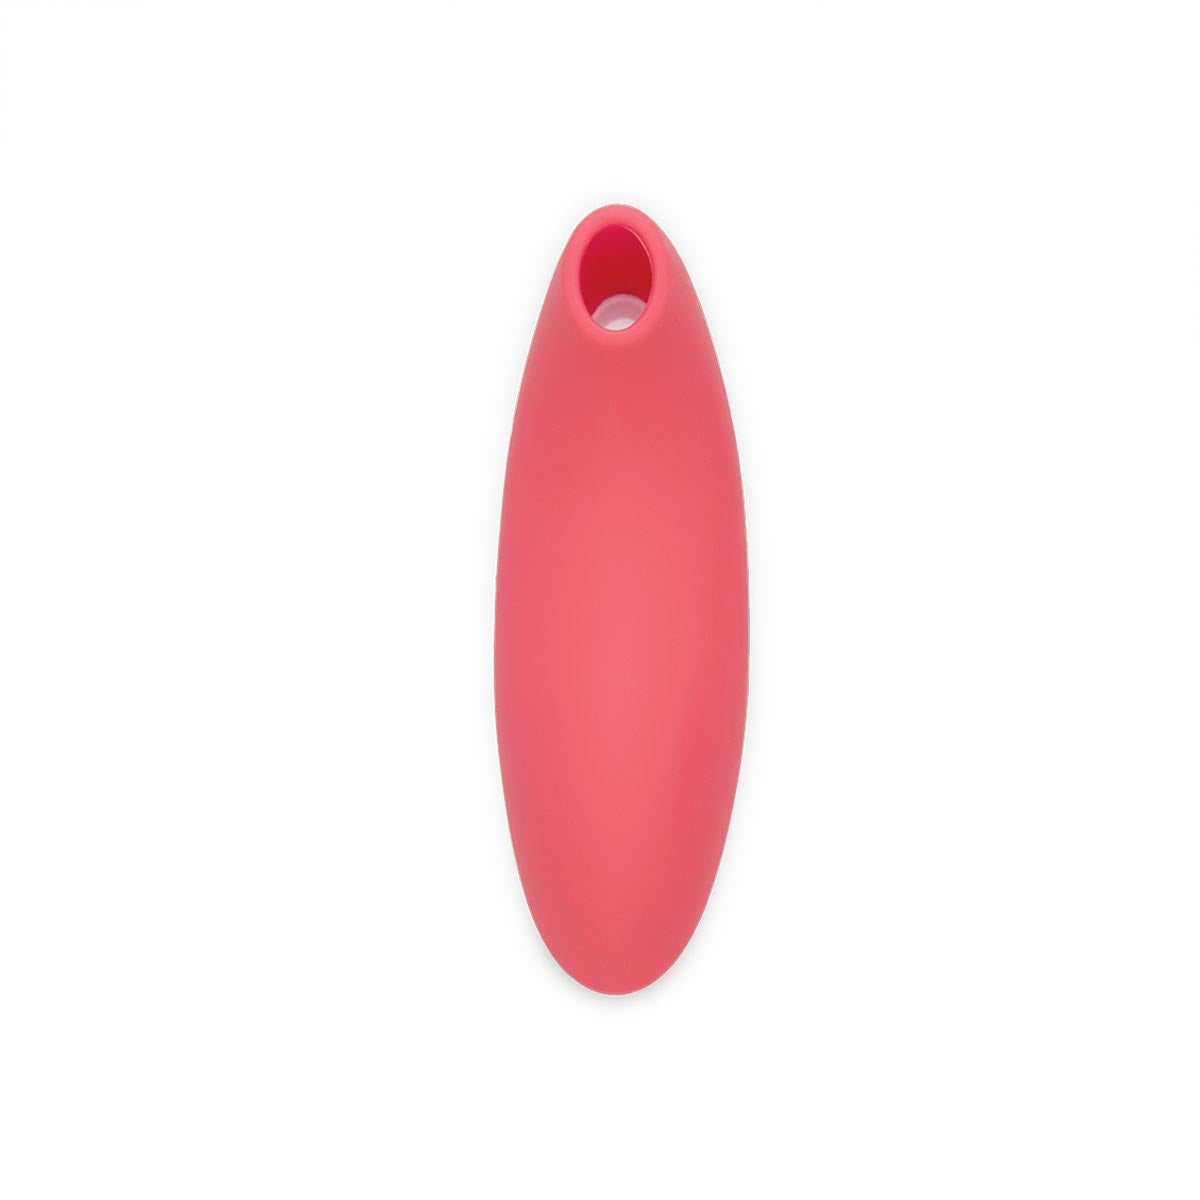 Front view of orange silicone air pressure clitoral stimulator with round opening